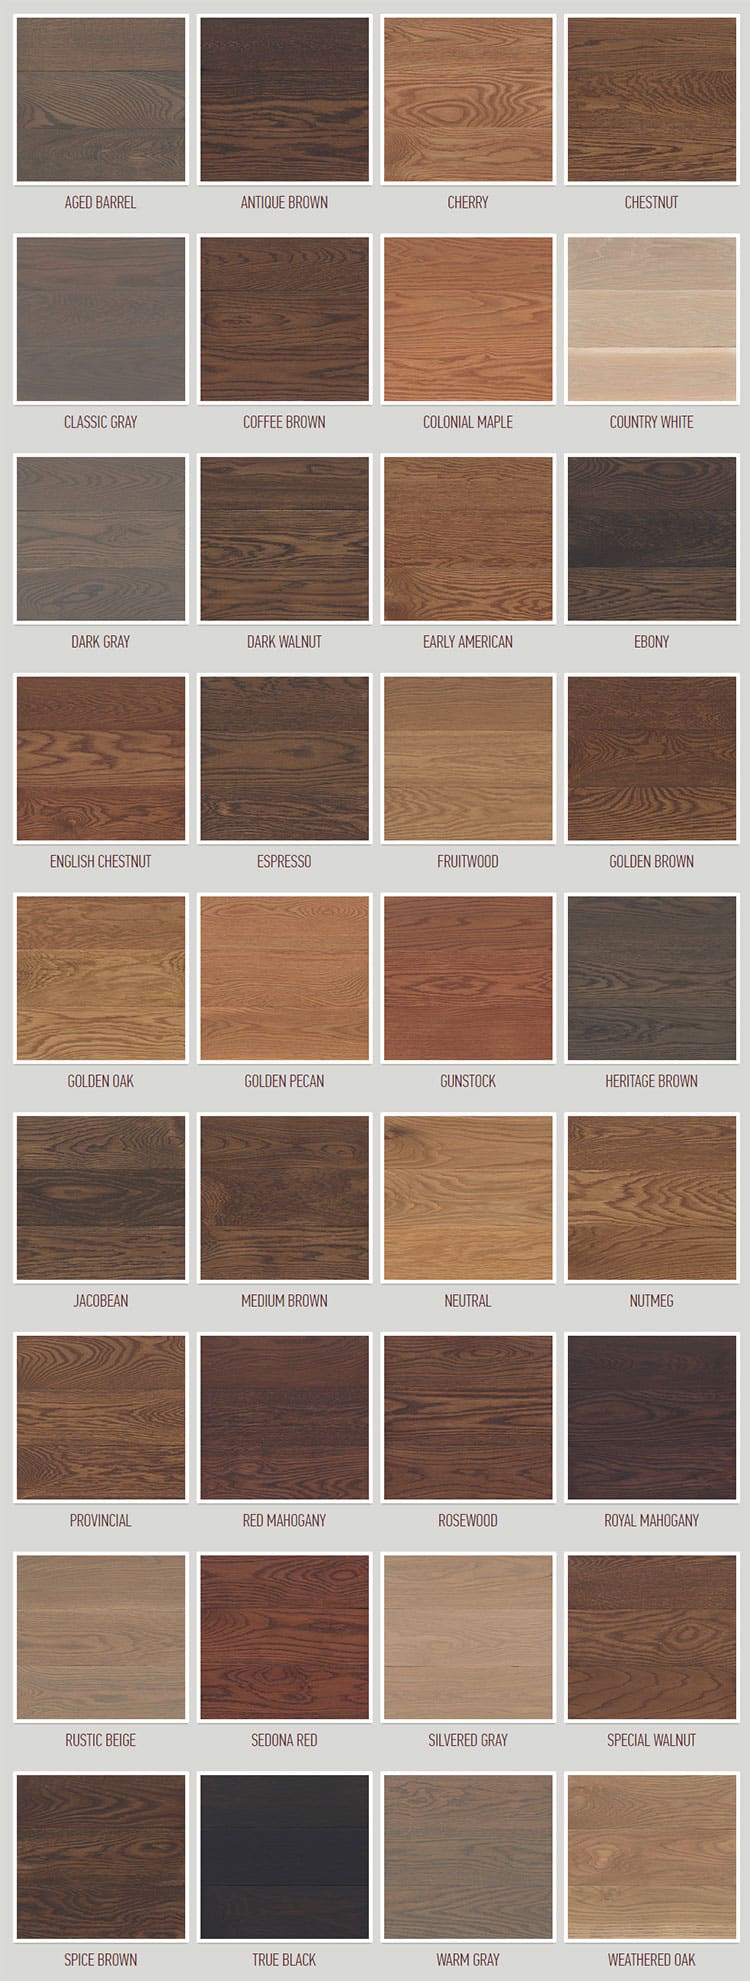 What Color Should I Stain My Wood Floors, Colors That Go With Hardwood Floors